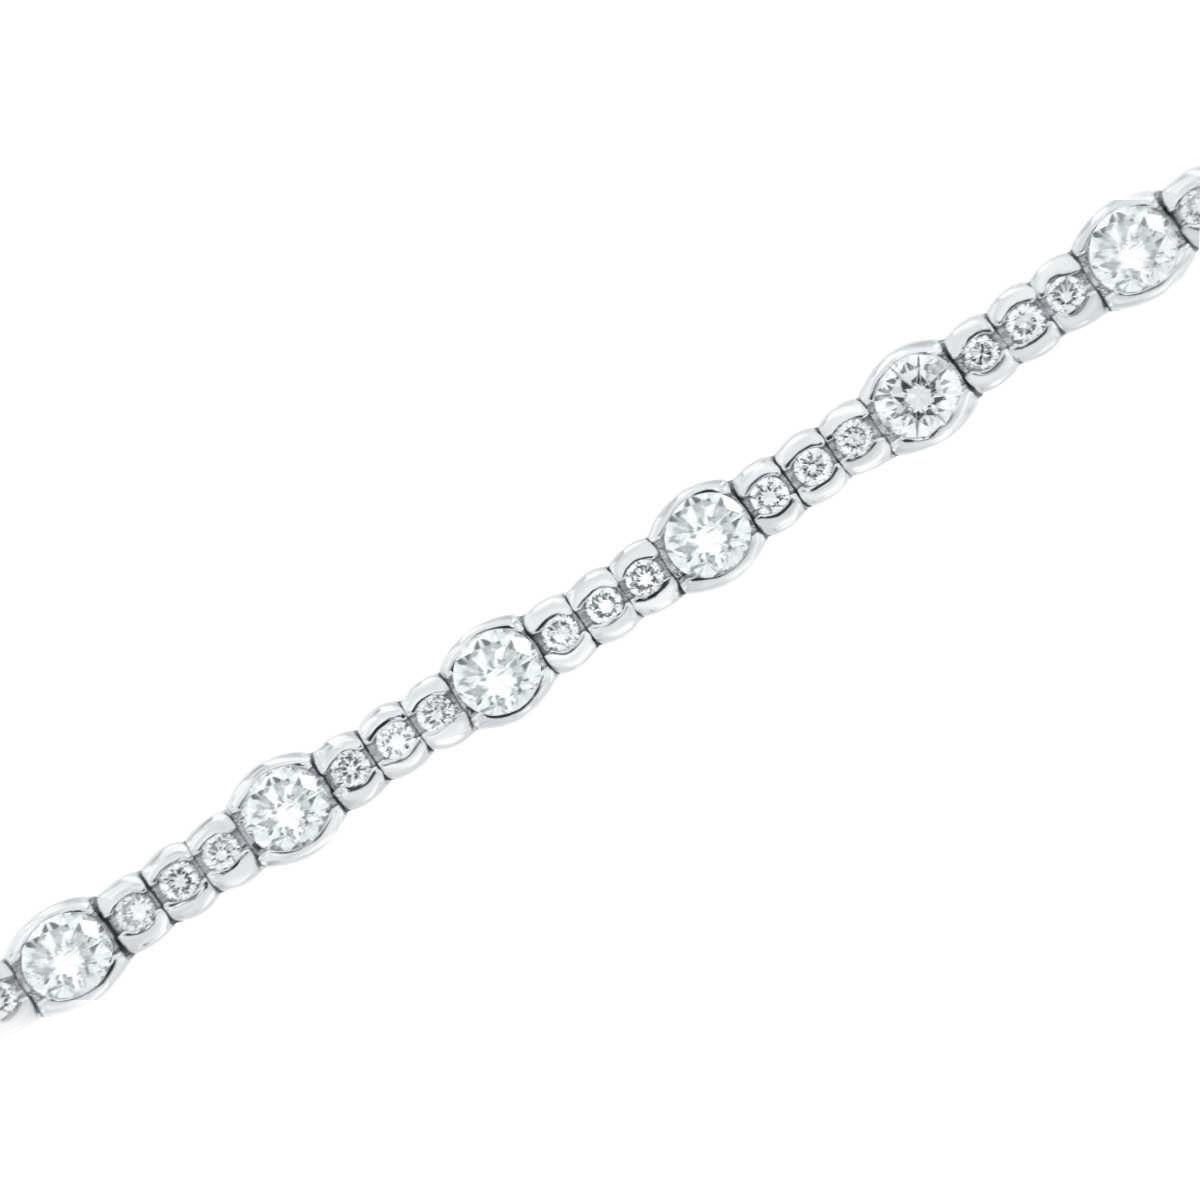 This stunning bracelet is a sixty-four ( 64) Round brilliant diamonds half bezel set for a weight of 5.93 Carat. Sixten (16) of the diamonds are 1/4 carat each ( 0.25 carat each), and forty-eight ( 48) of the diamonds are 0.04 carat each. 

Average